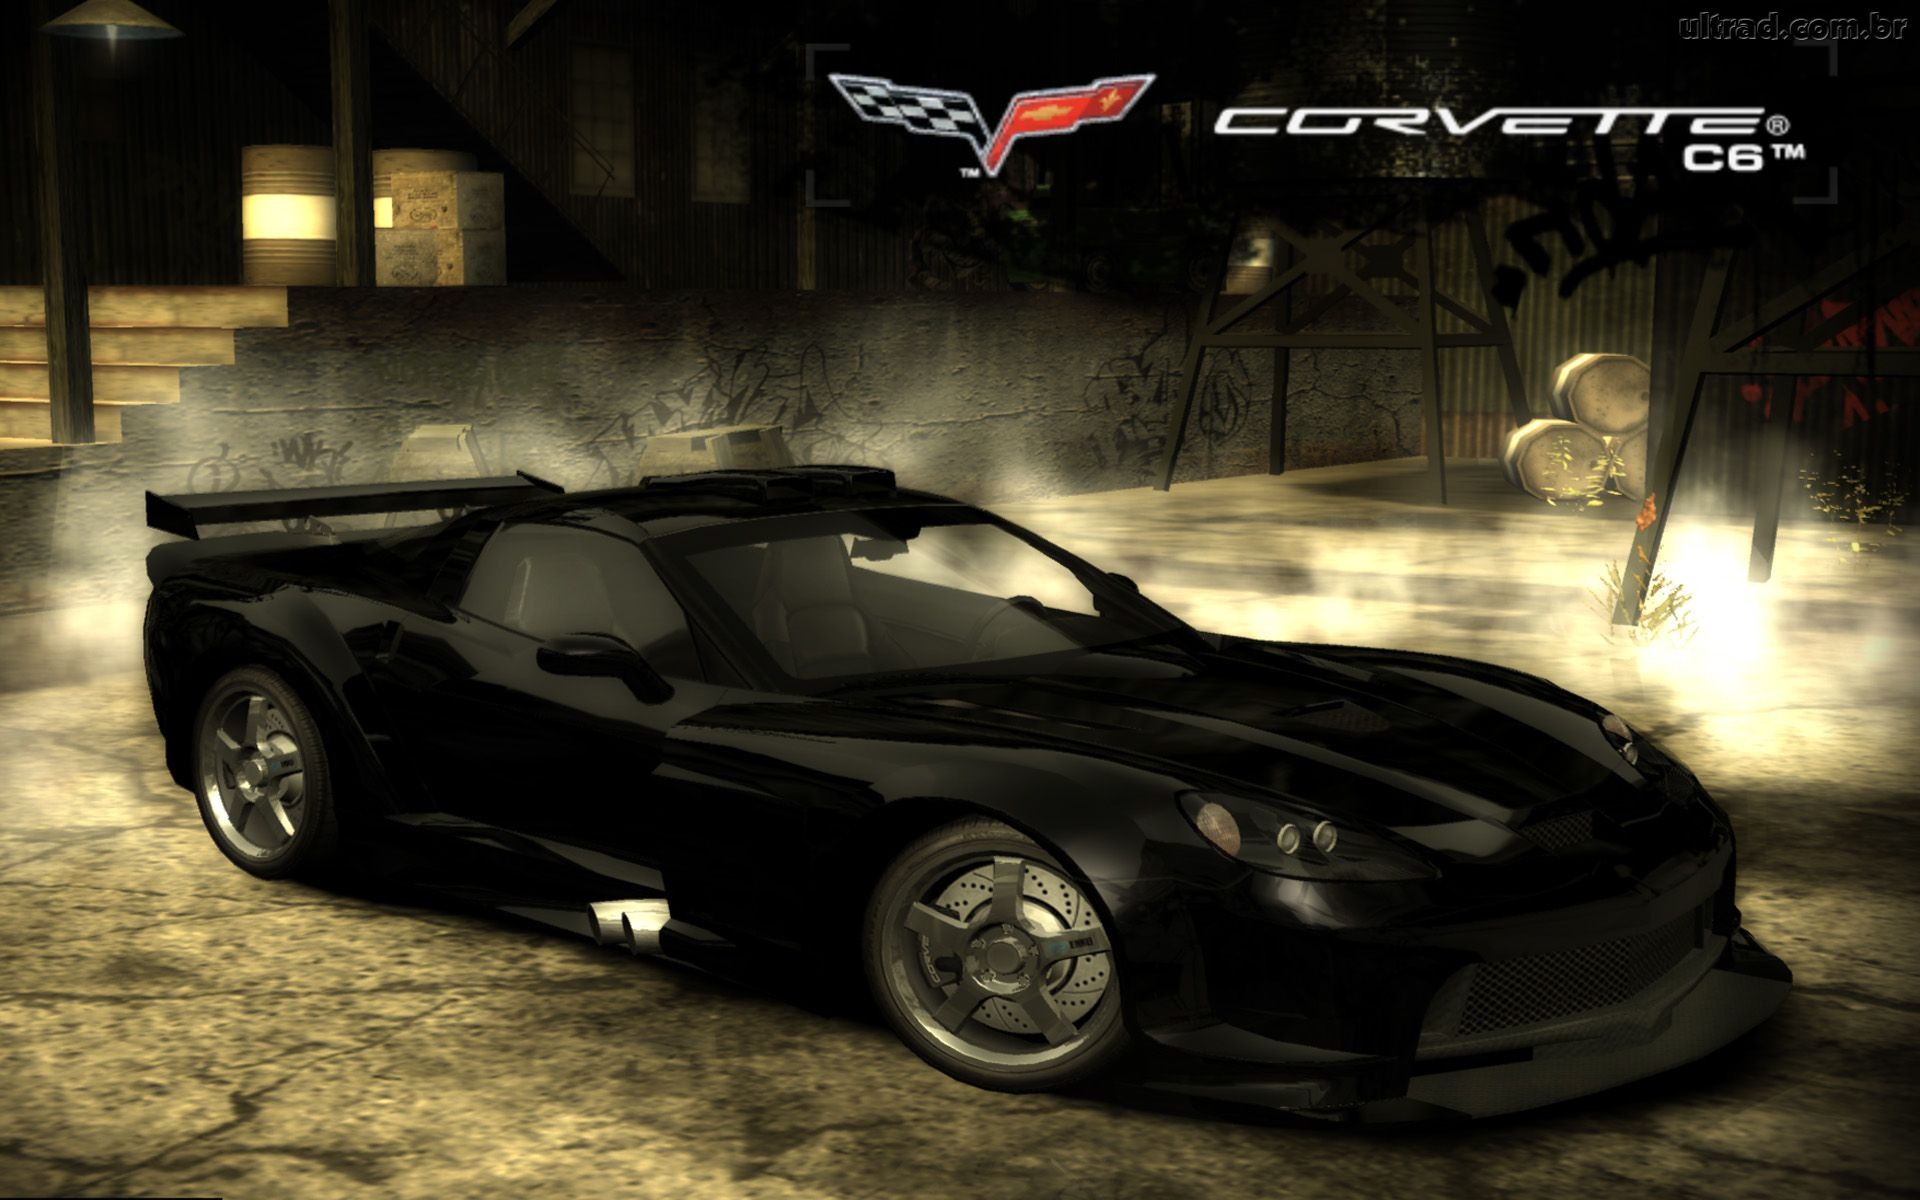 Need for Speed: Most Wanted 极品飞车17：最高通缉 高清壁纸3 - 1920x1200